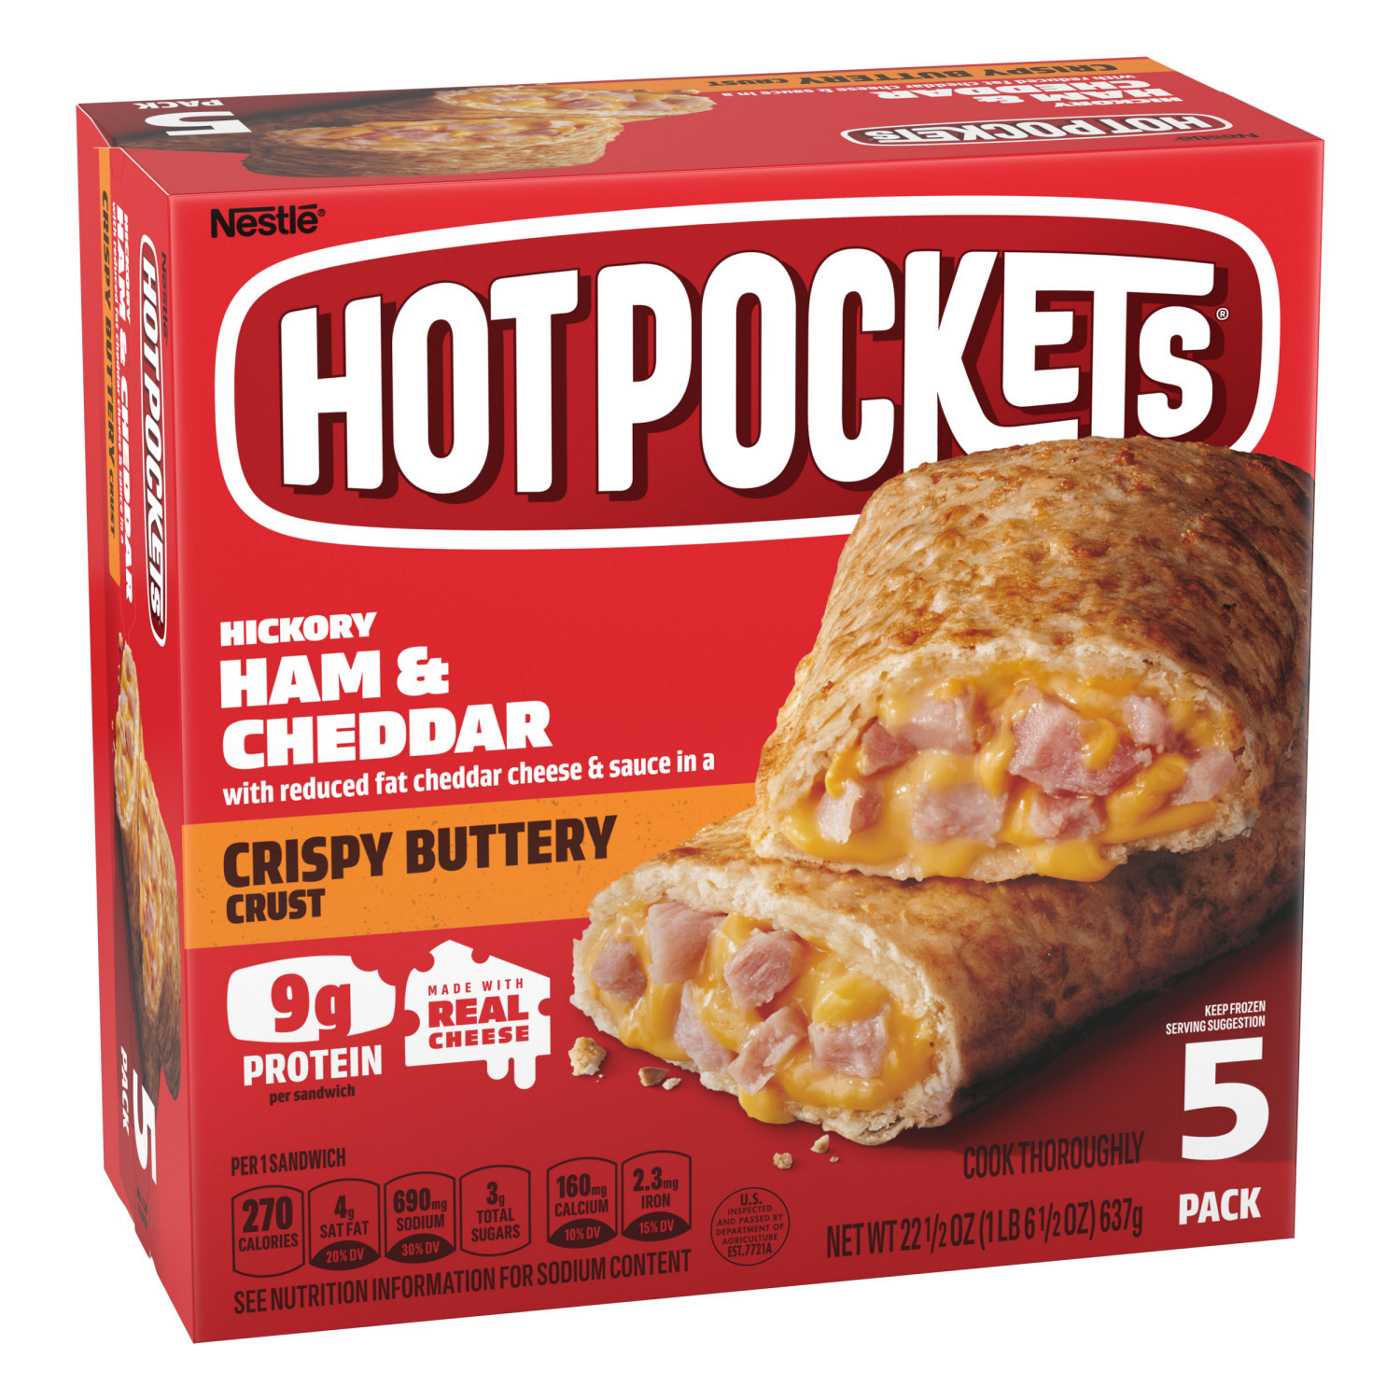 Hot Pockets Hickory Ham & Cheddar Frozen Sandwiches - Crispy Buttery Crust; image 7 of 8